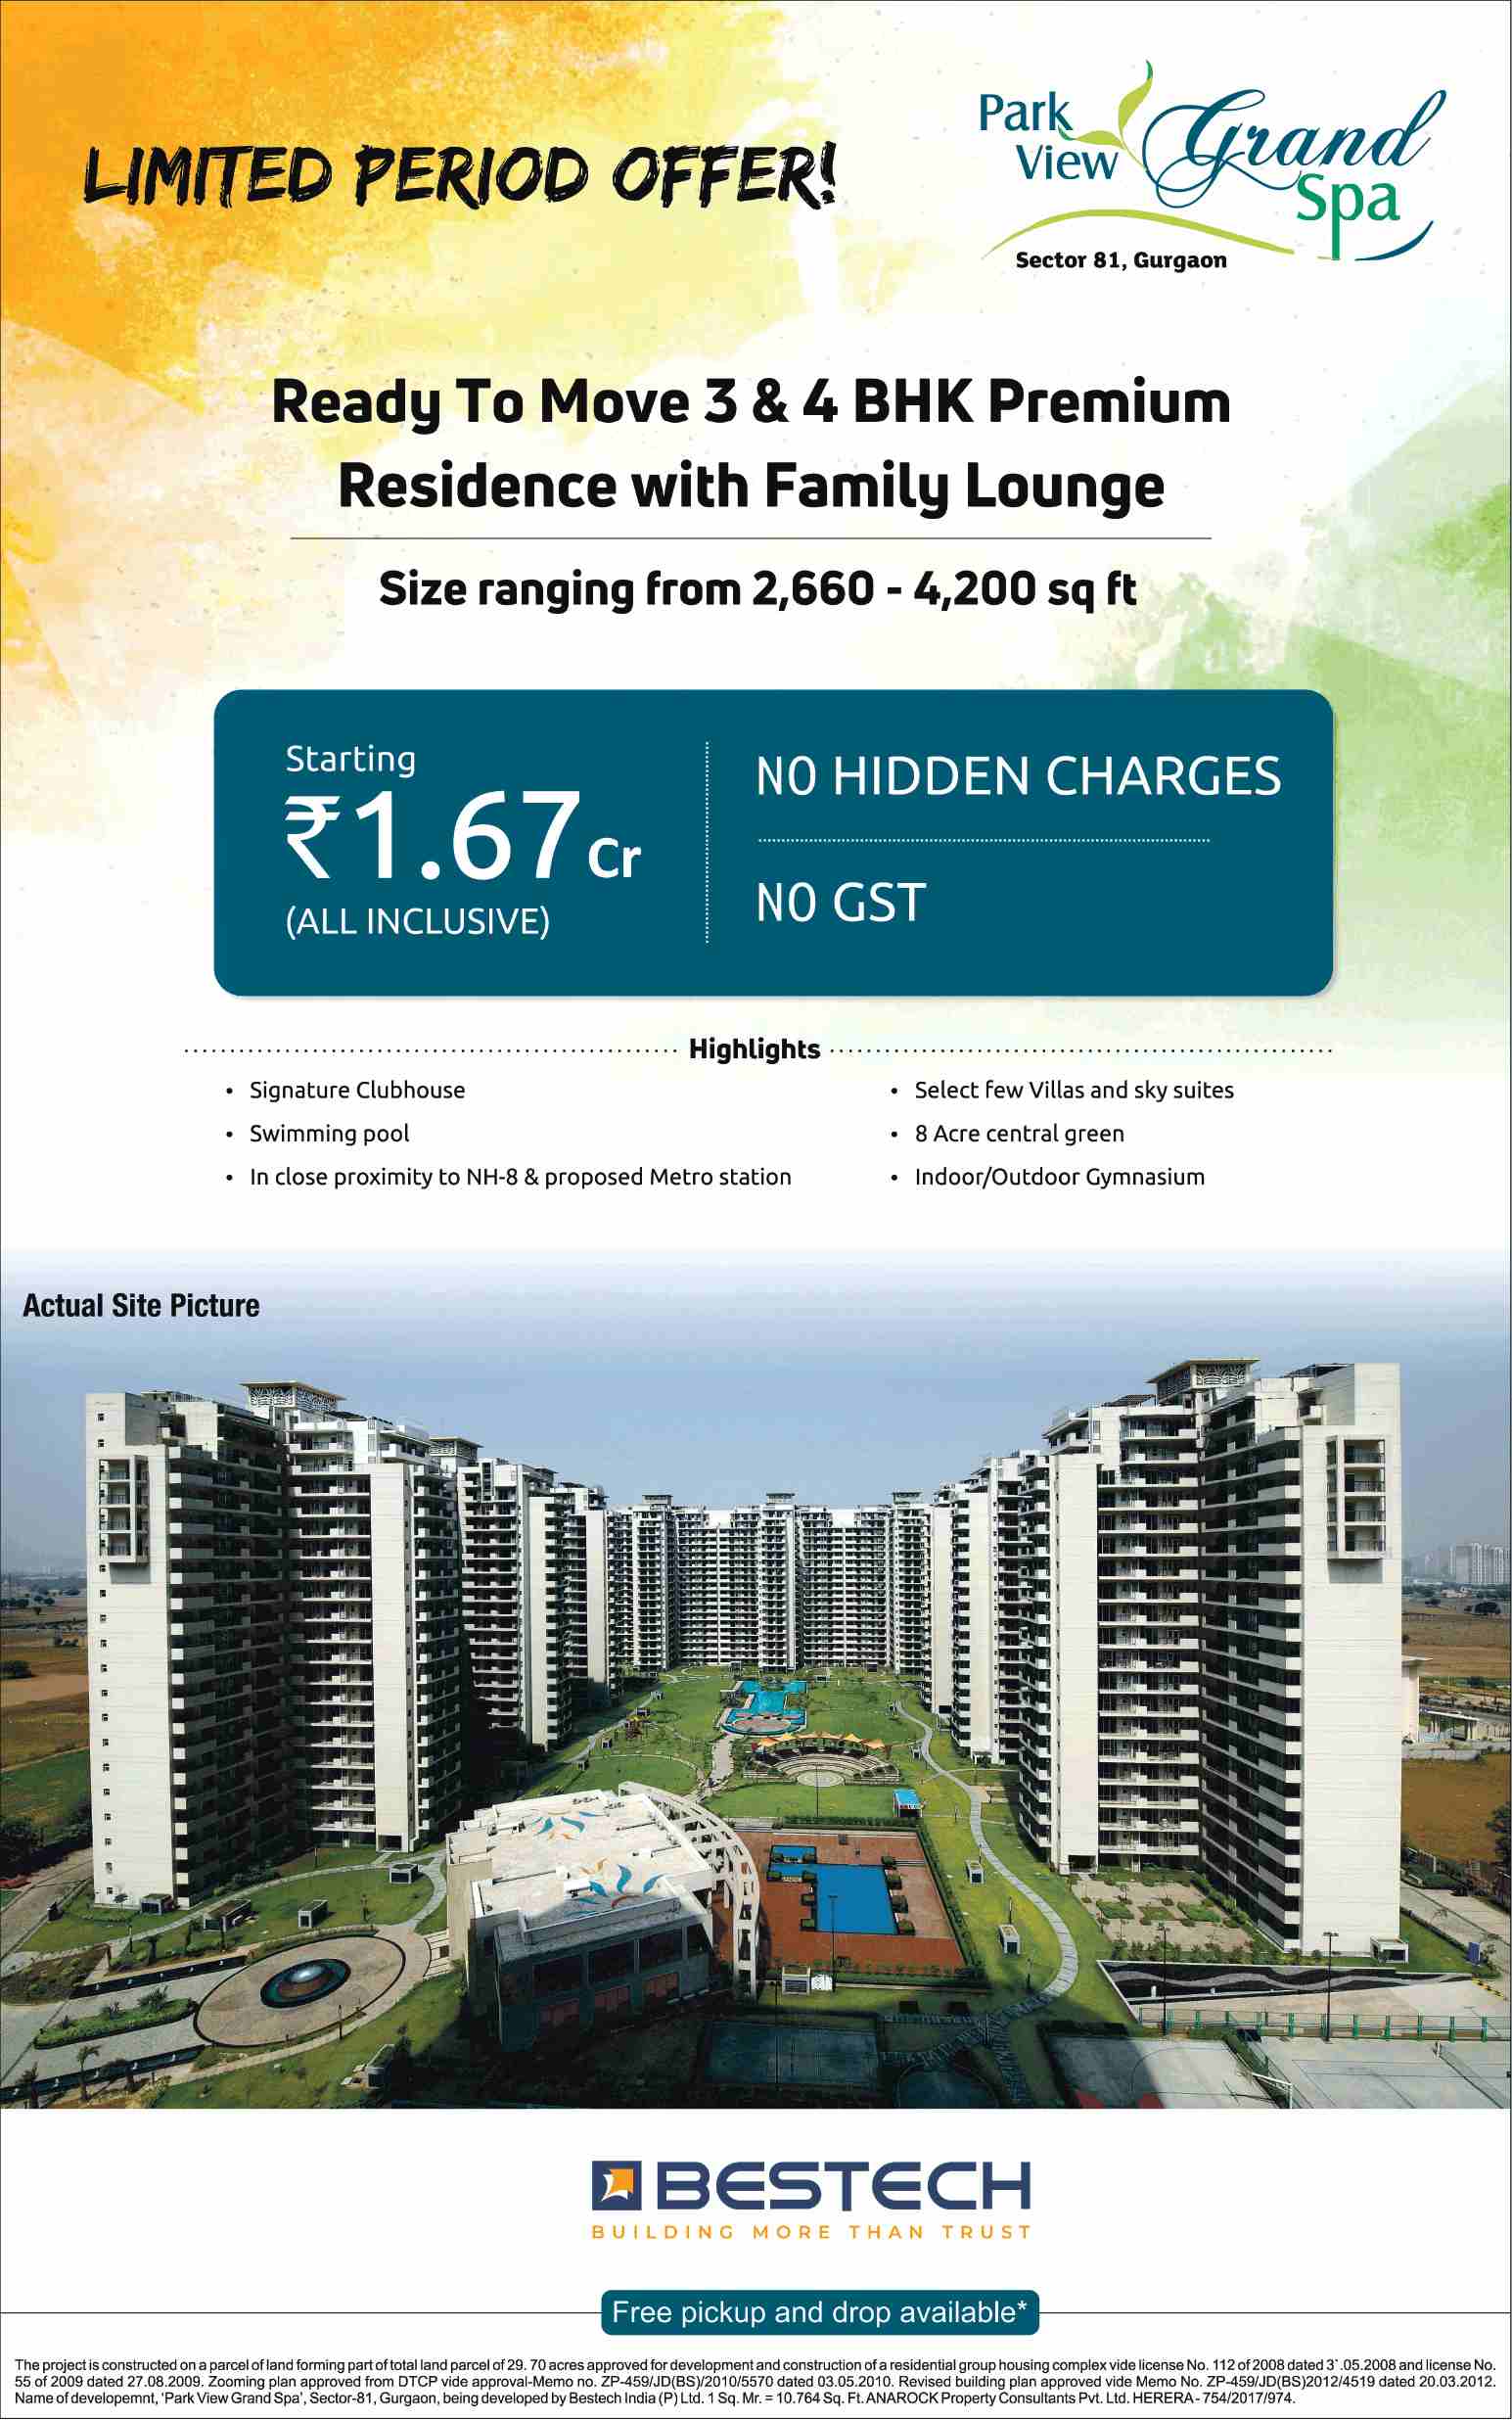 Book premium residences with family lounge @ Rs. 1.67 cr. at Bestech Park View Grand Spa in Gurgaon Update